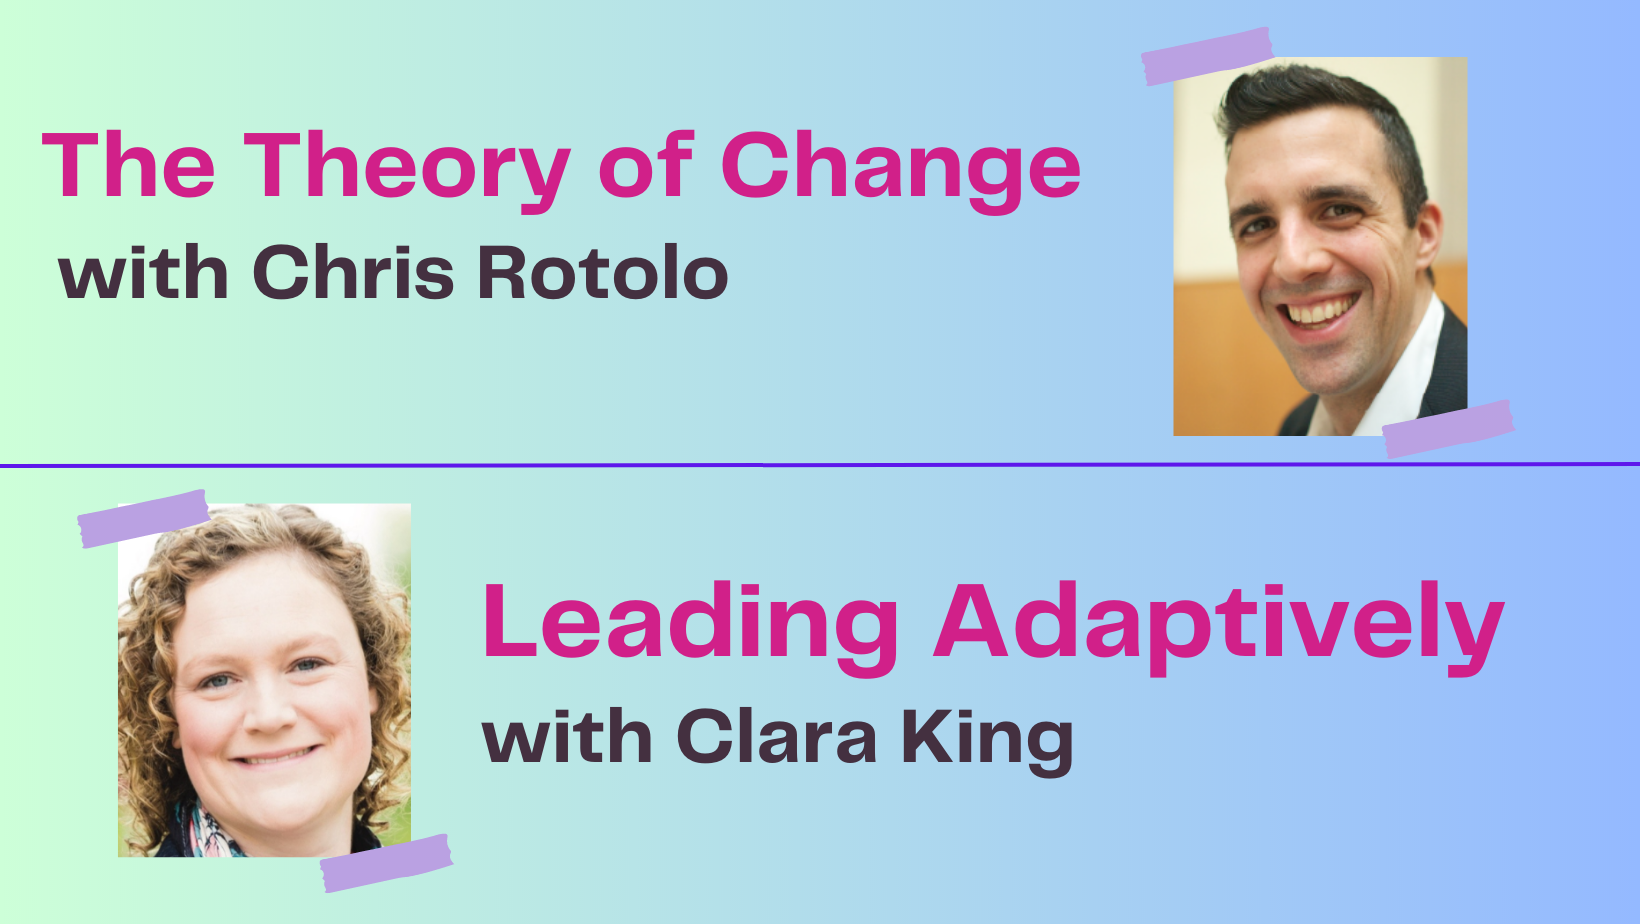 Leading Adaptively with Clara king, and The Theory of Change text with profile picture Chris Ritolo. 